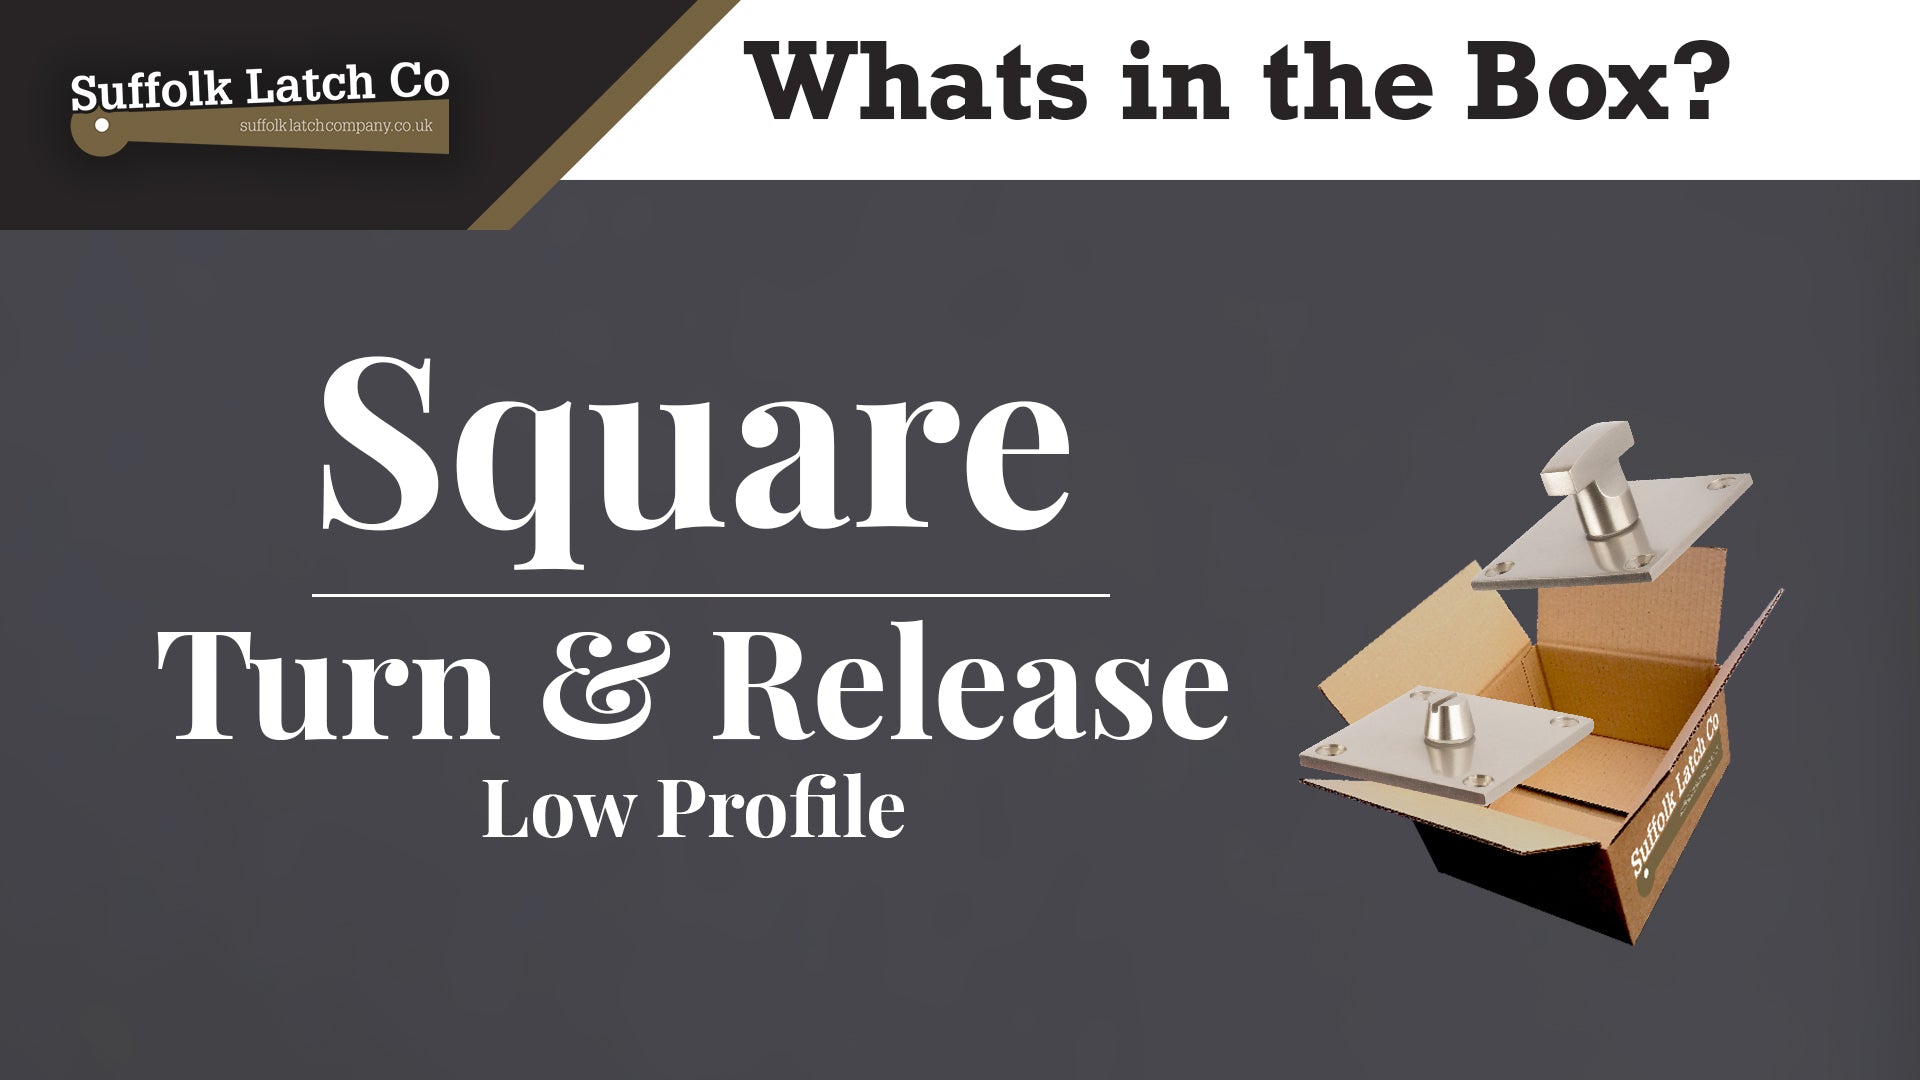 What's in the Box: Square Turn & Release Low Profile